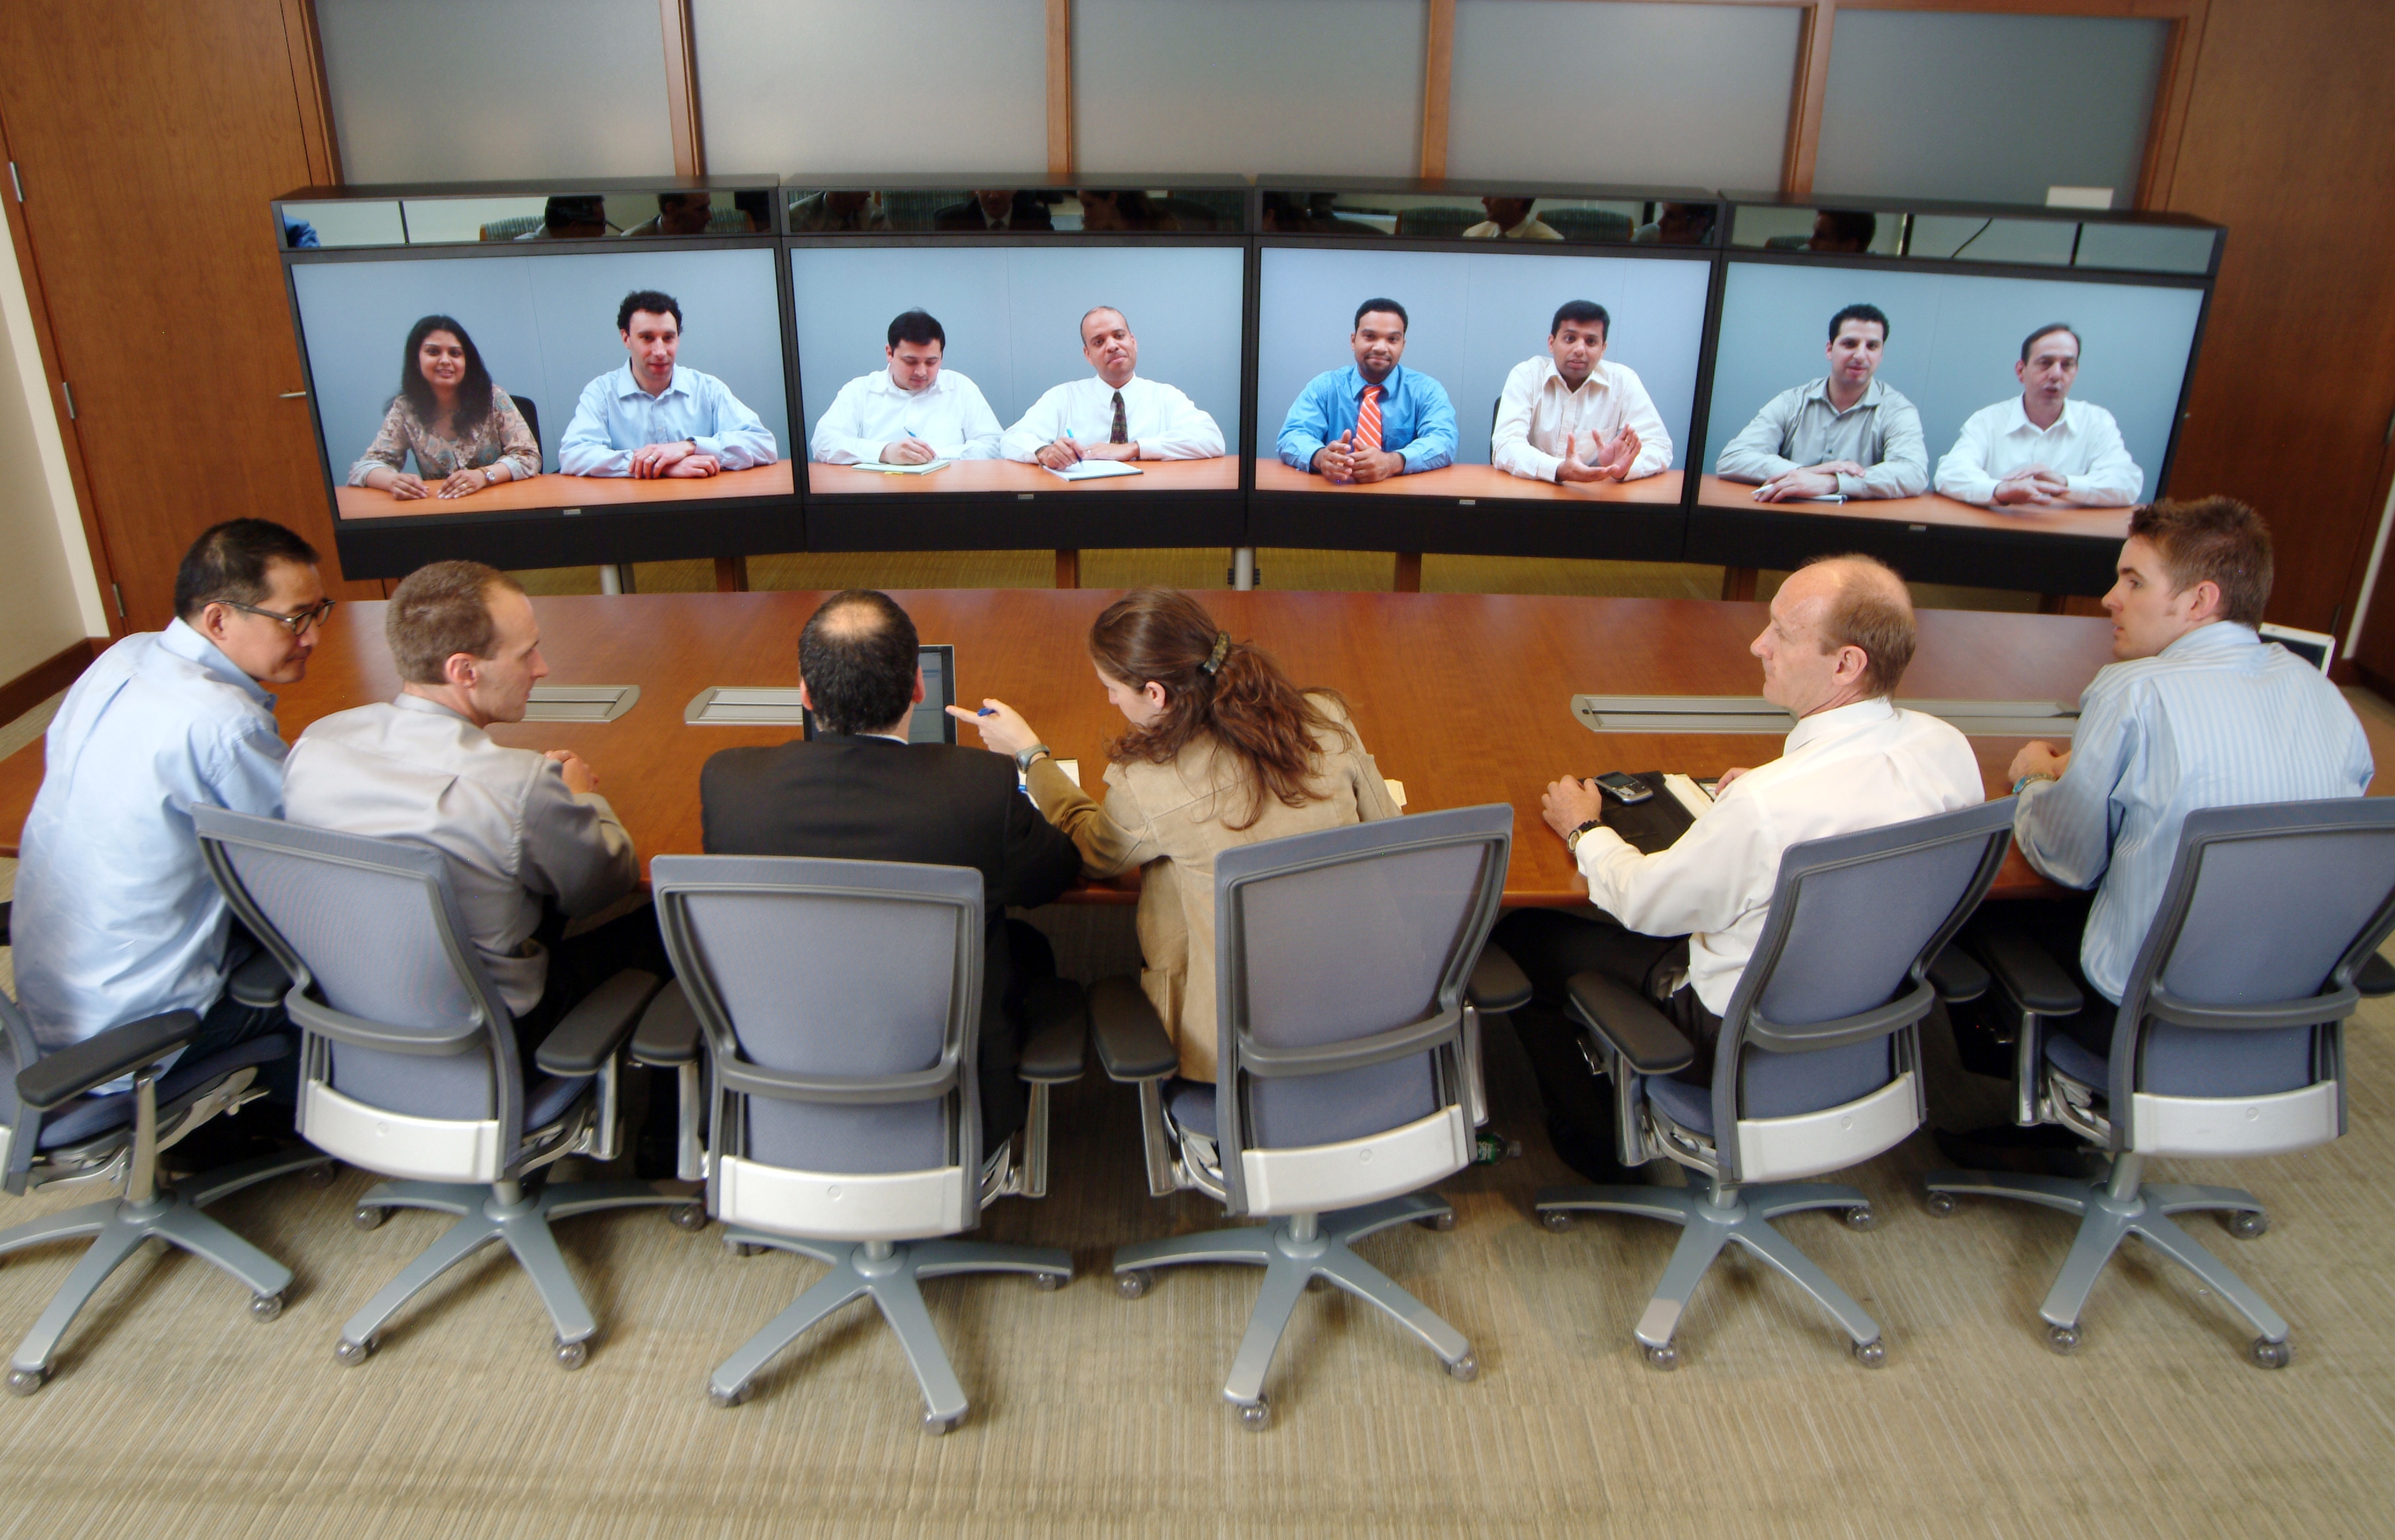 Geek insider, geekinsider, geekinsider. Com,, what's next: video conferencing industry predictions, uncategorized